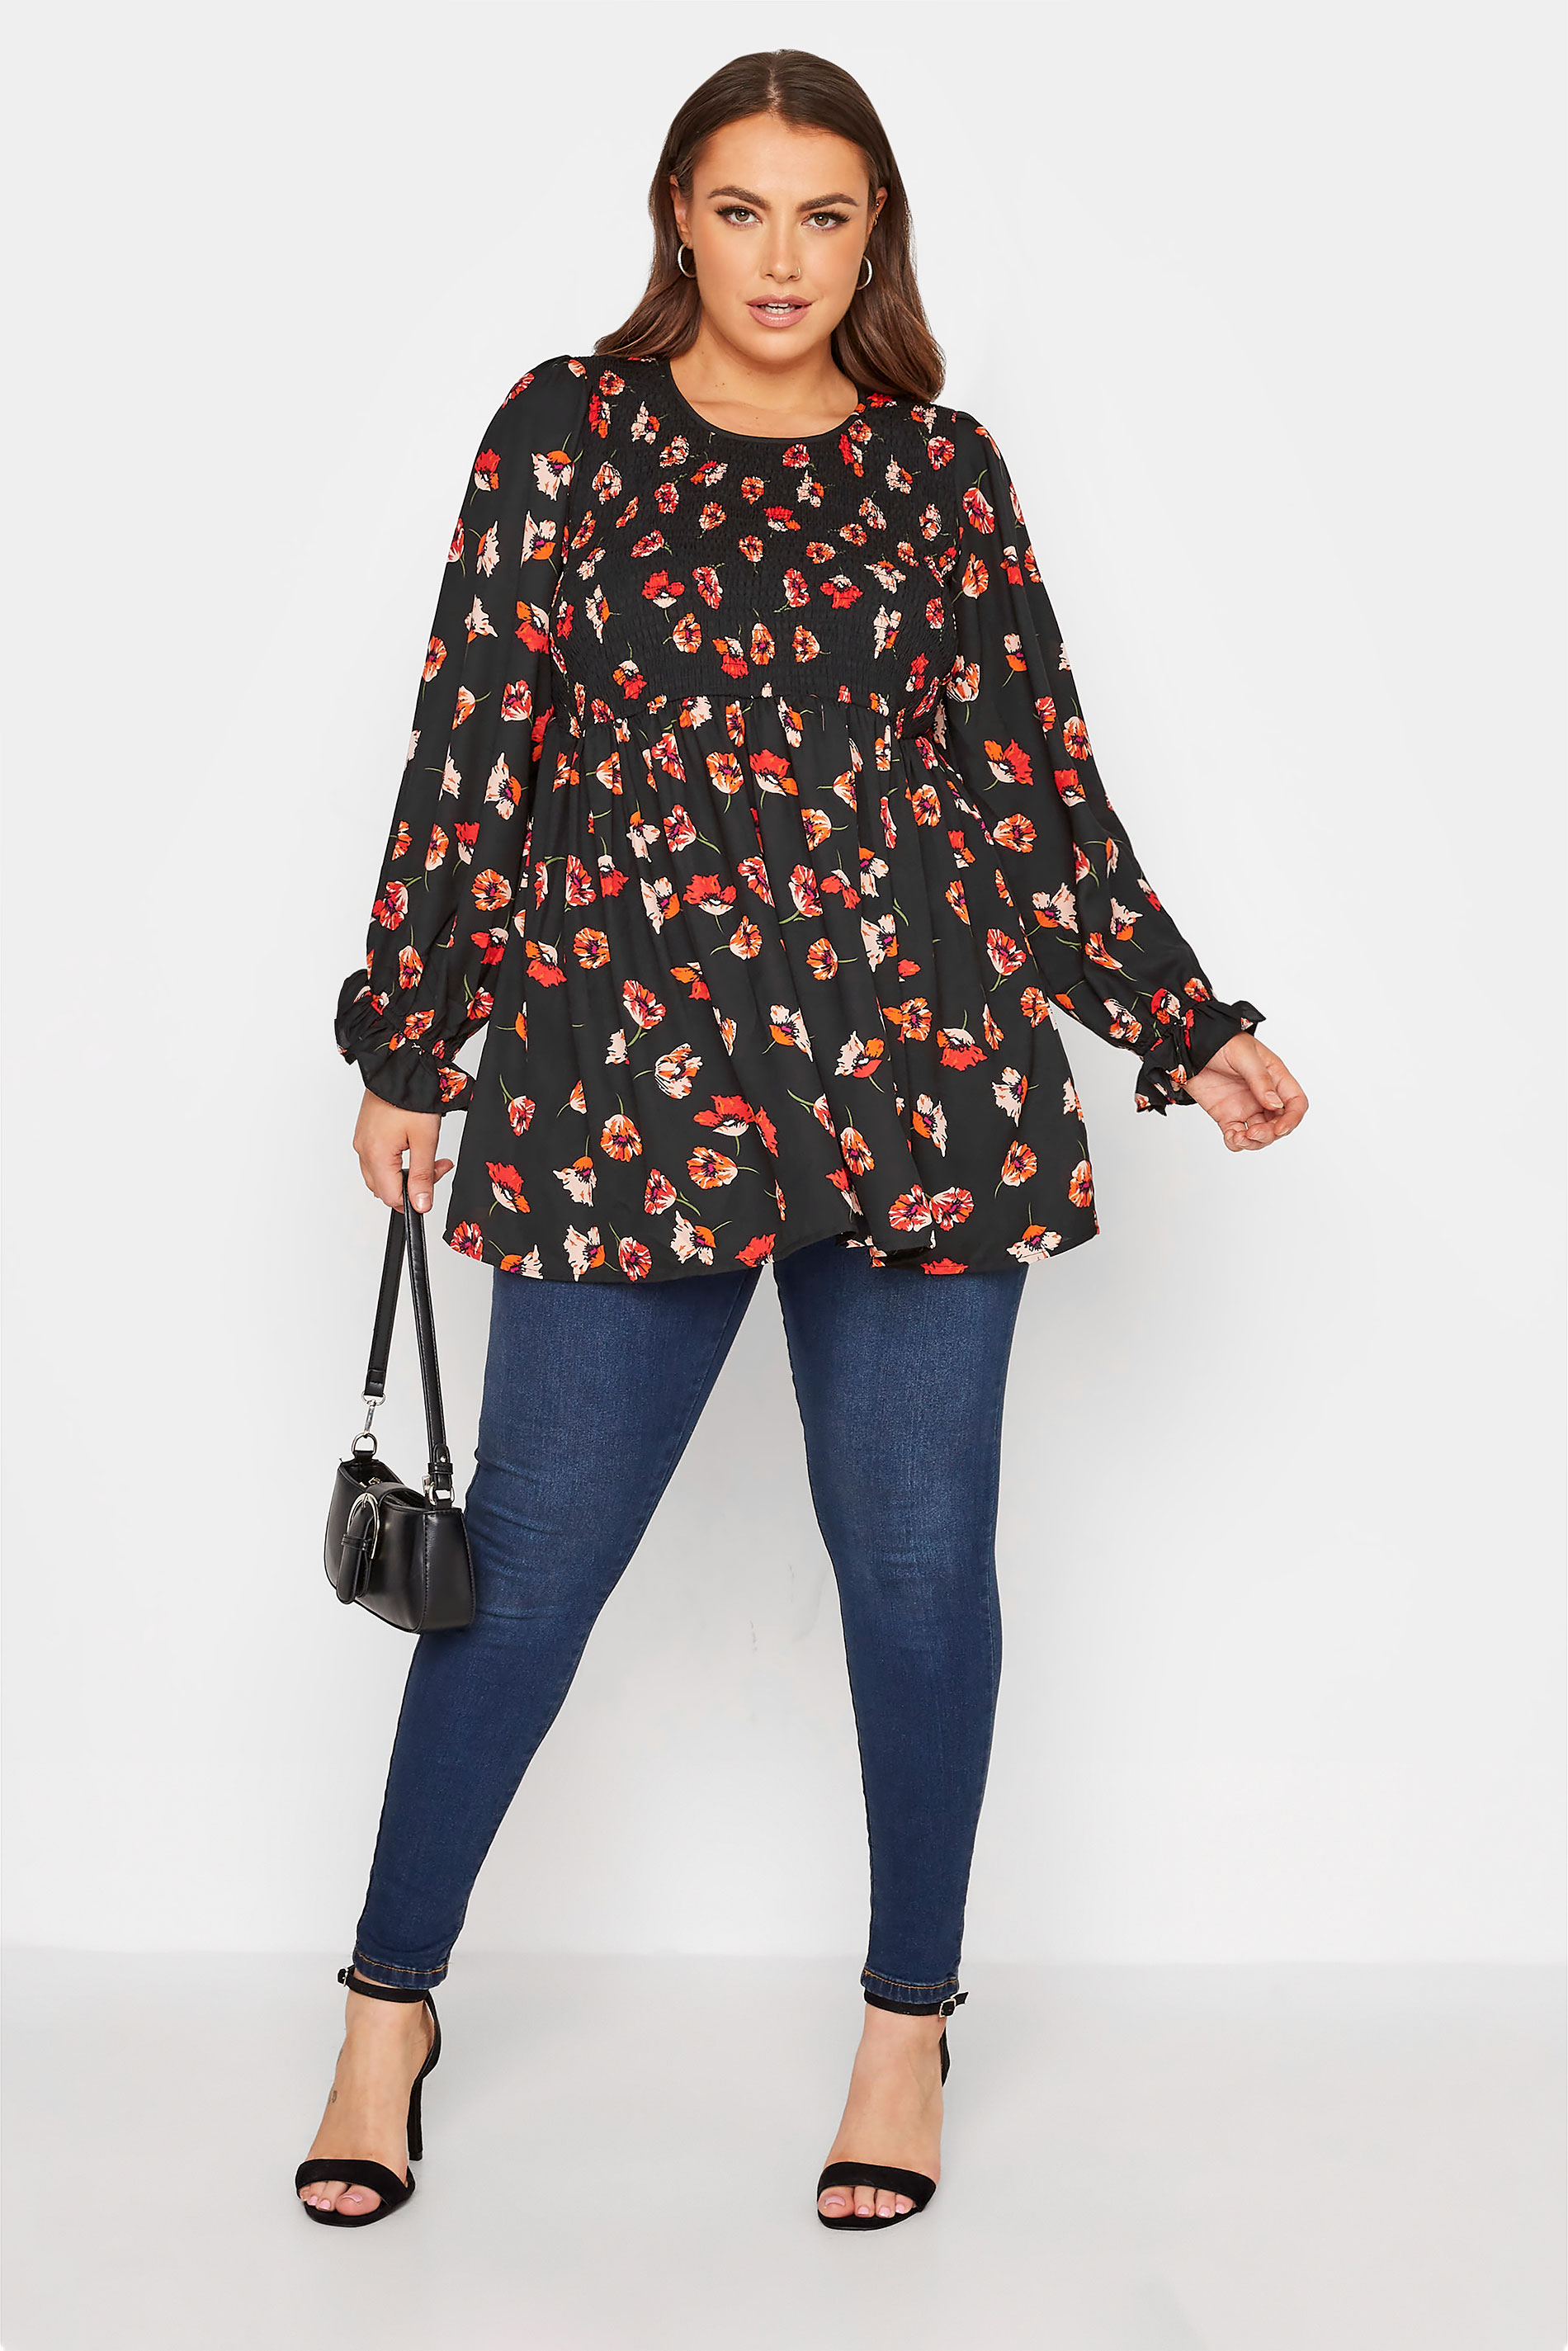 Grande taille  Tops Grande taille  Tops Jersey | LIMITED COLLECTION - Top Noir Floral Style Peplum - CU48634